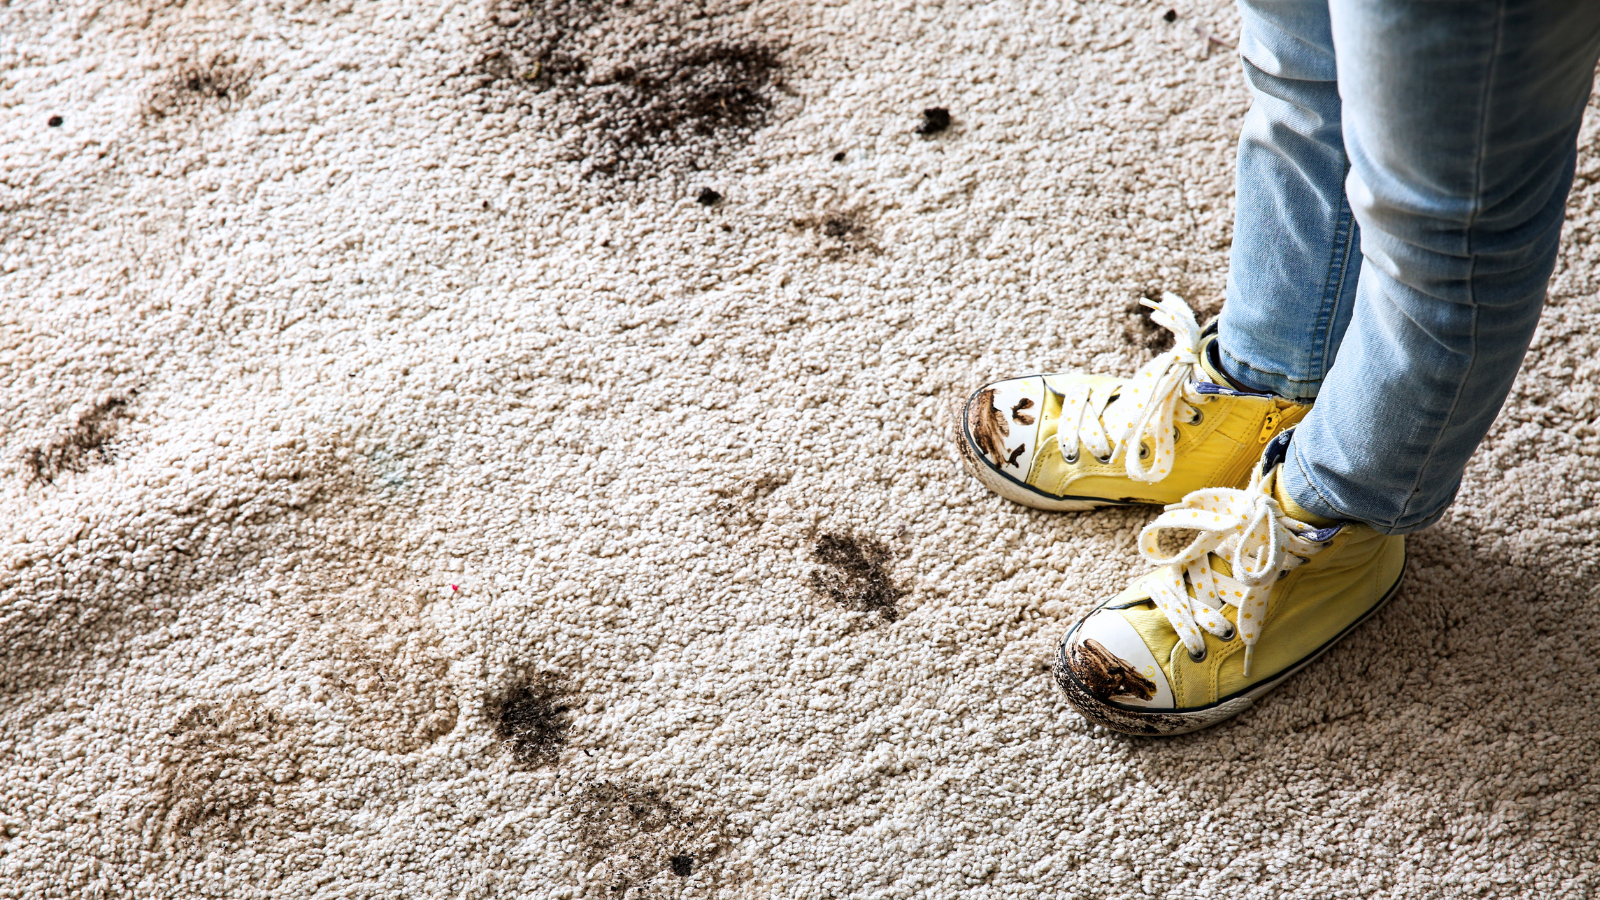 Stuck in the Mud: A Parent's Guide to Cleaning Jeans After a Muddy Mishap